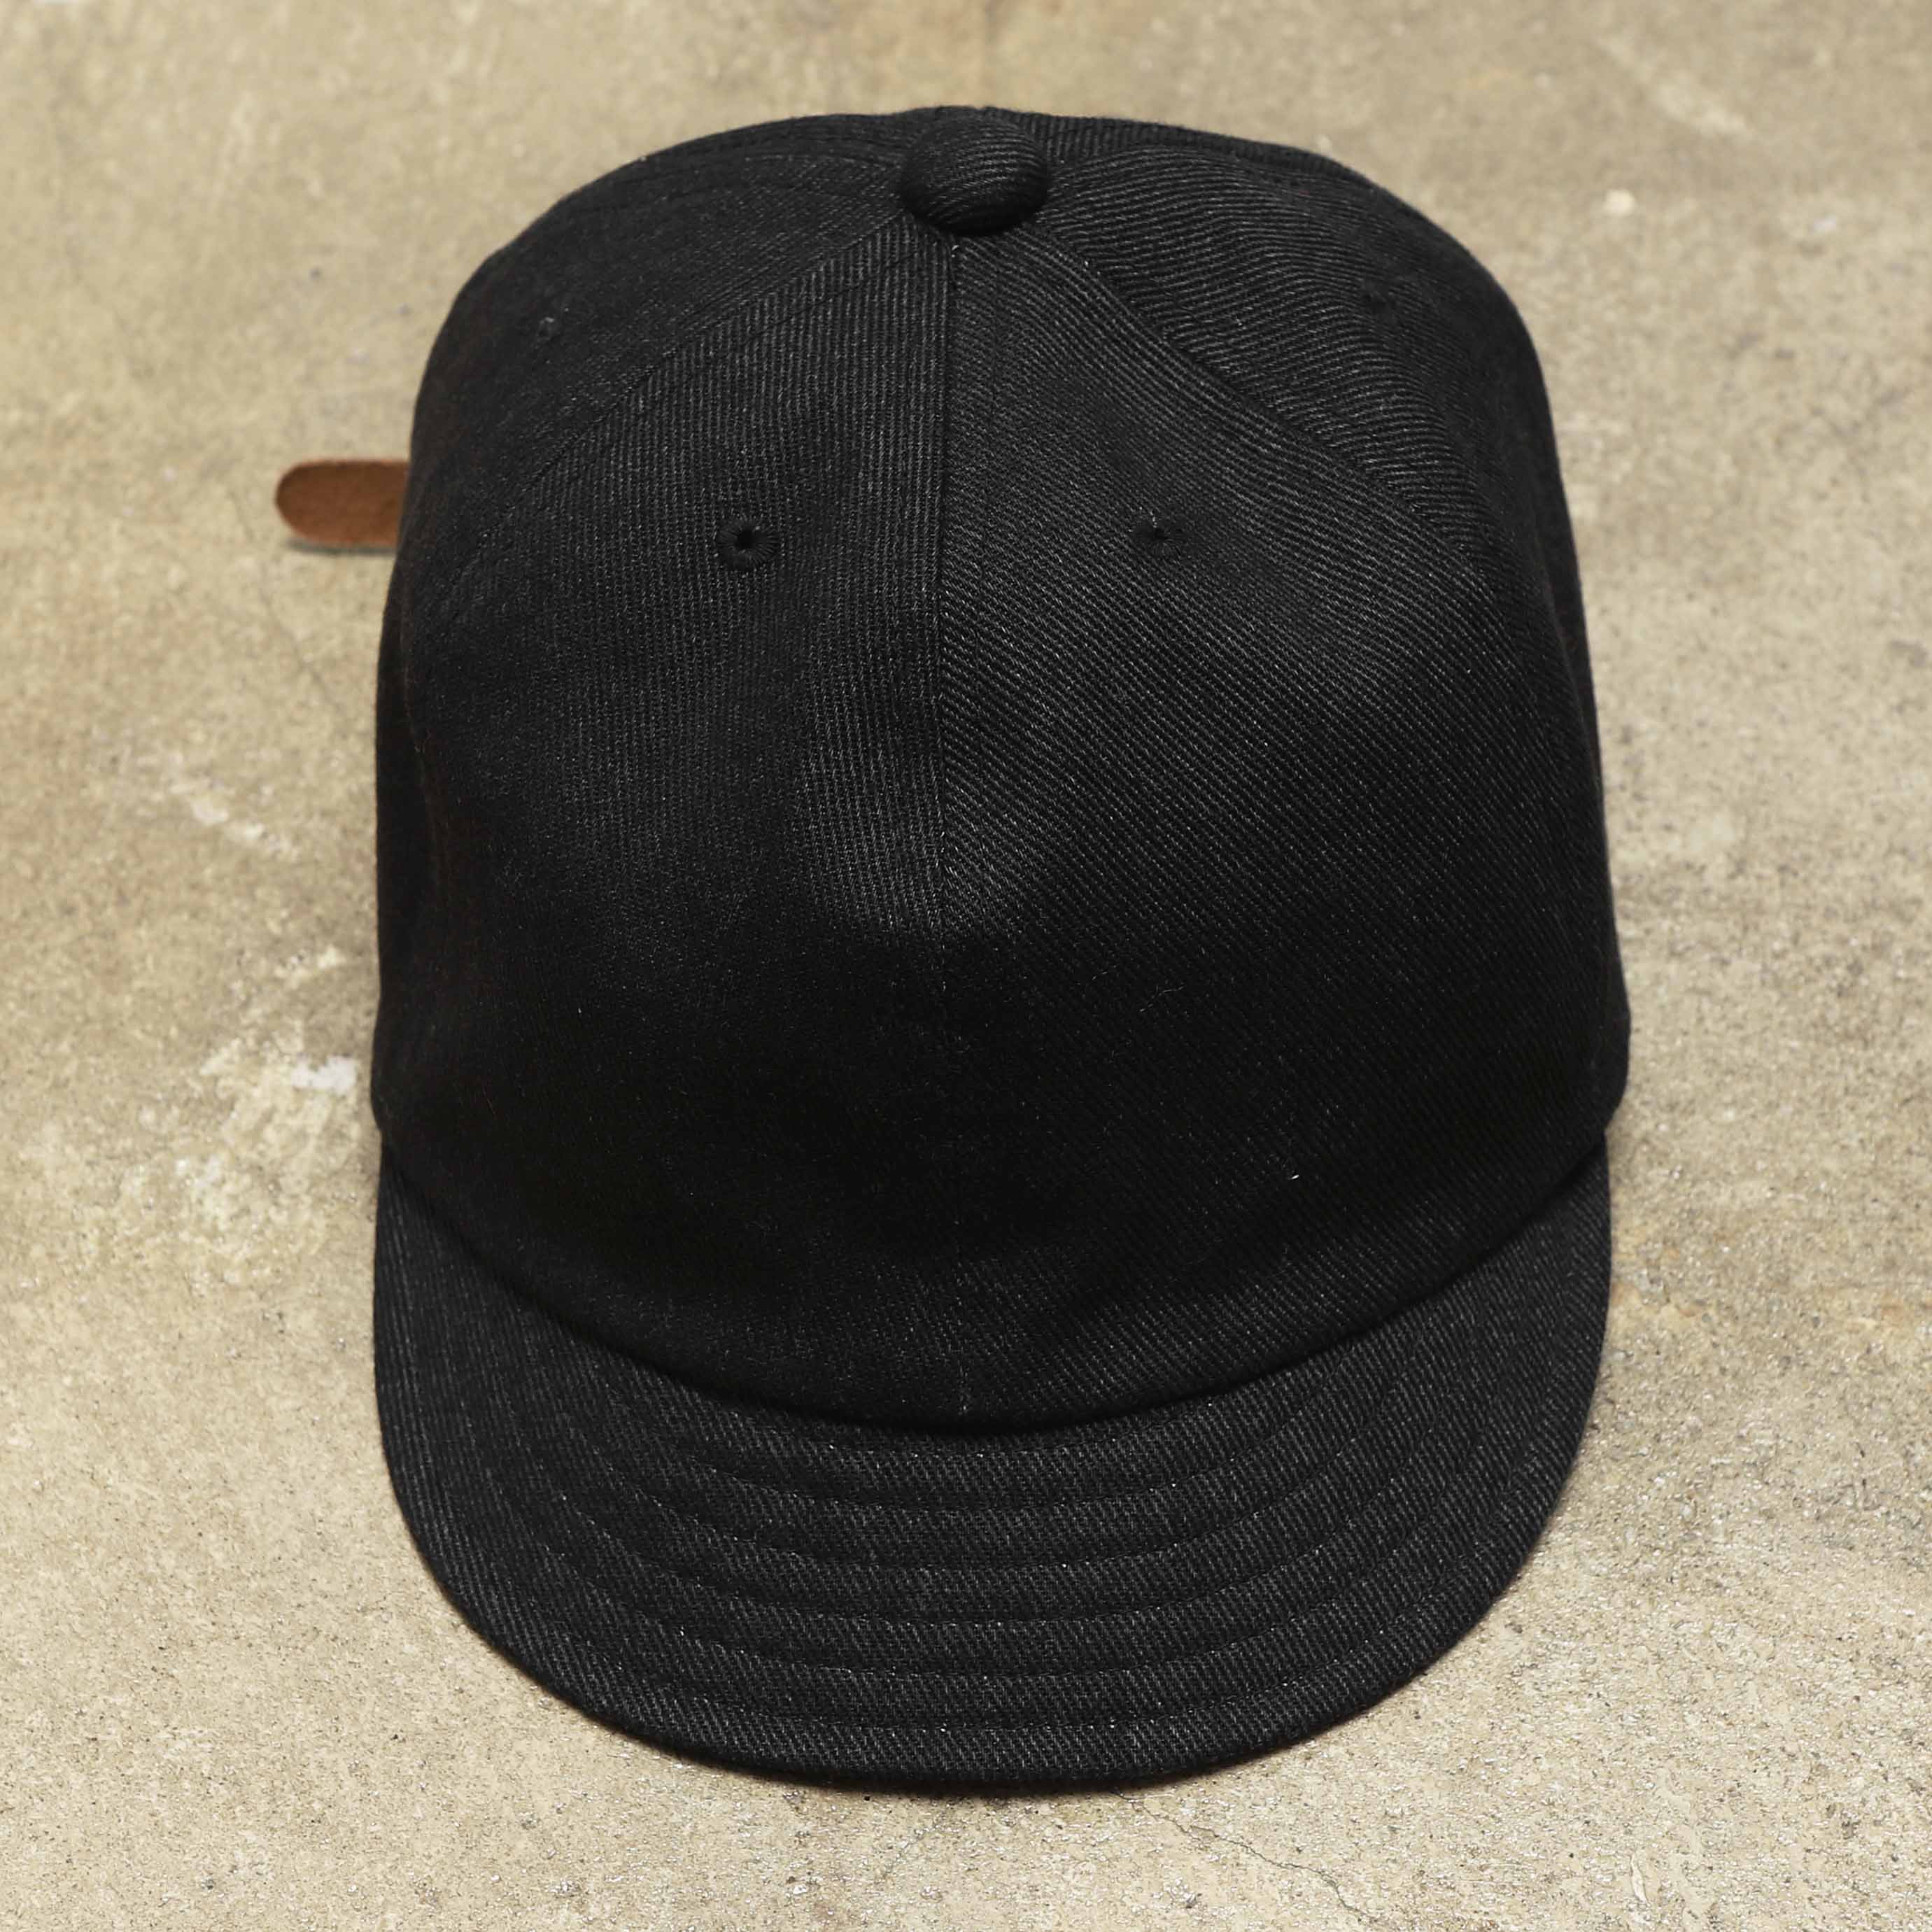 THE FAT HATTER 6PANEL CAP - CHARCOAL